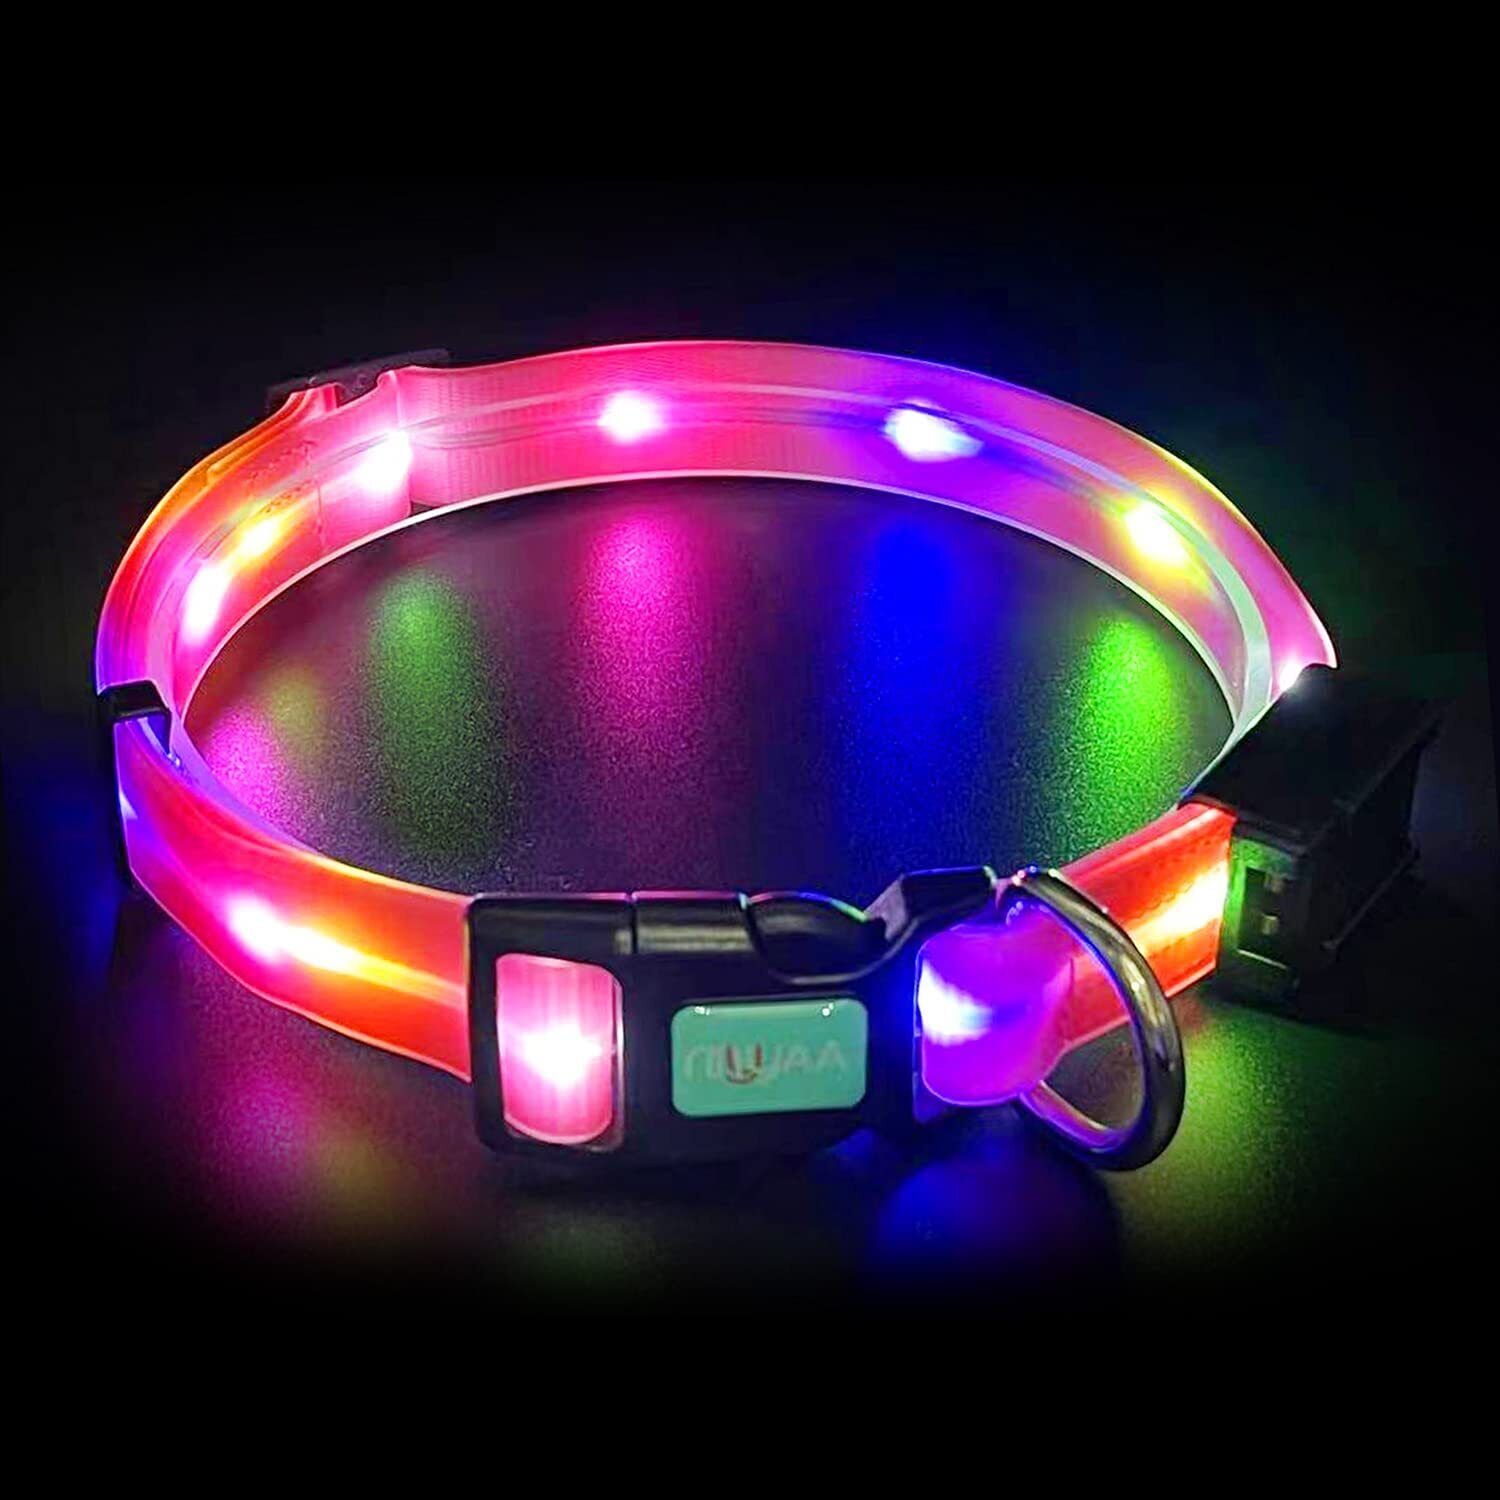 Collar Light up Dog USB Rechargeable Bright Flashing Waterproof Lighted Safety.